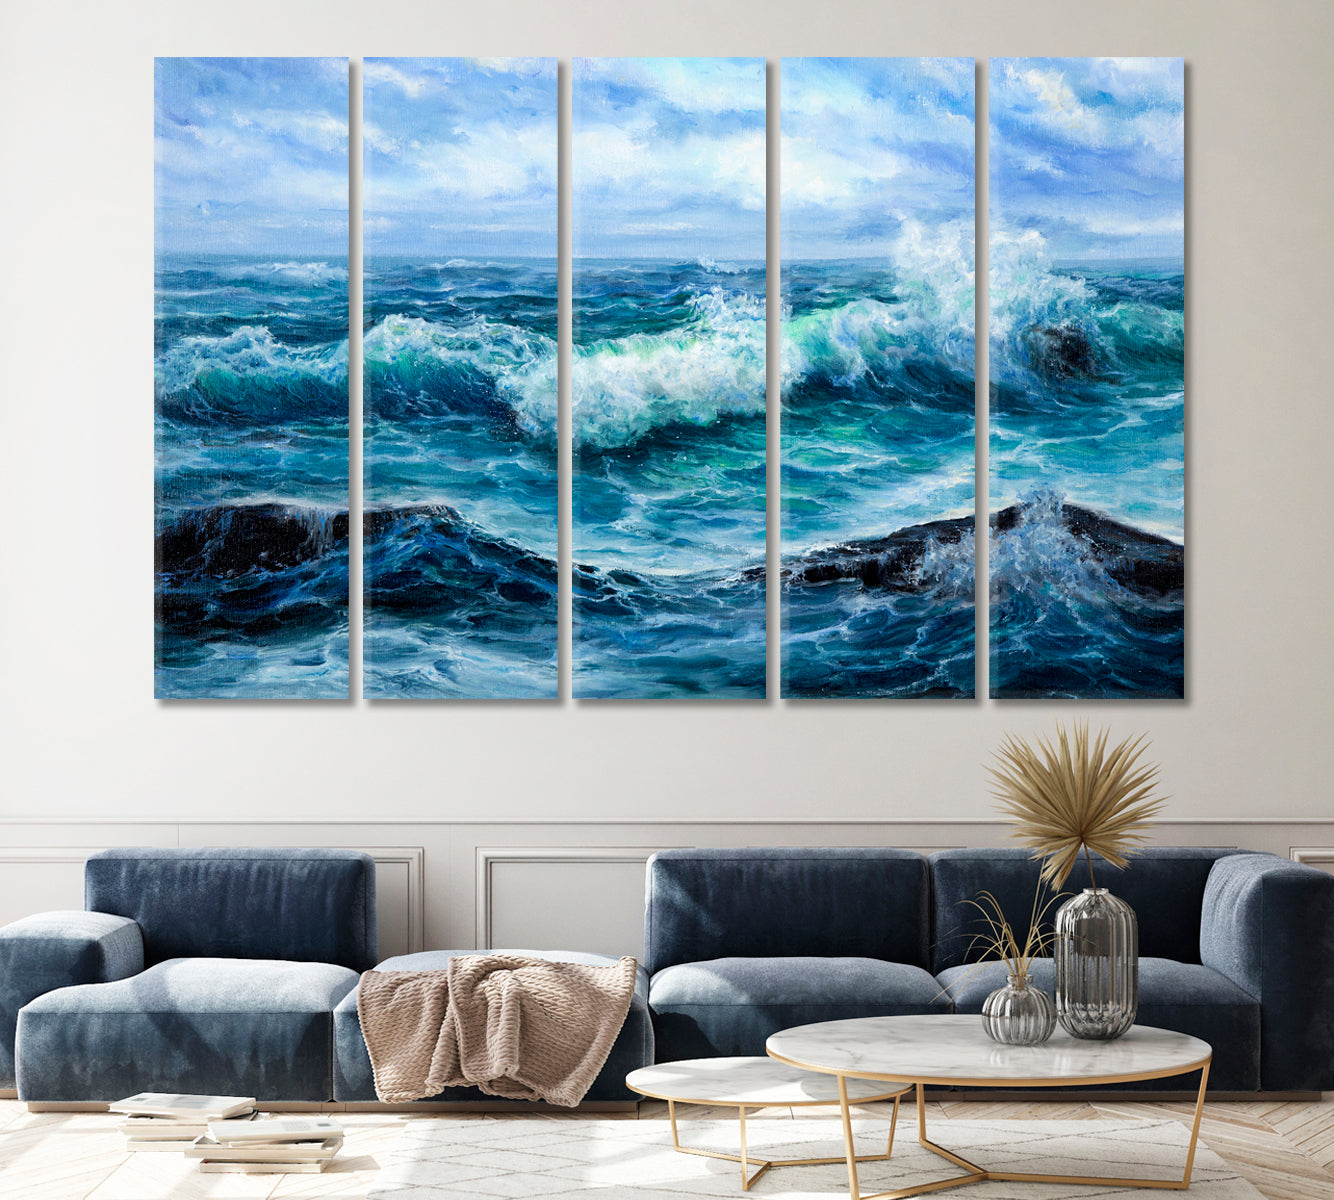 Modern Abstract Ocean Waves Canvas Print ArtLexy 5 Panels 36"x24" inches 